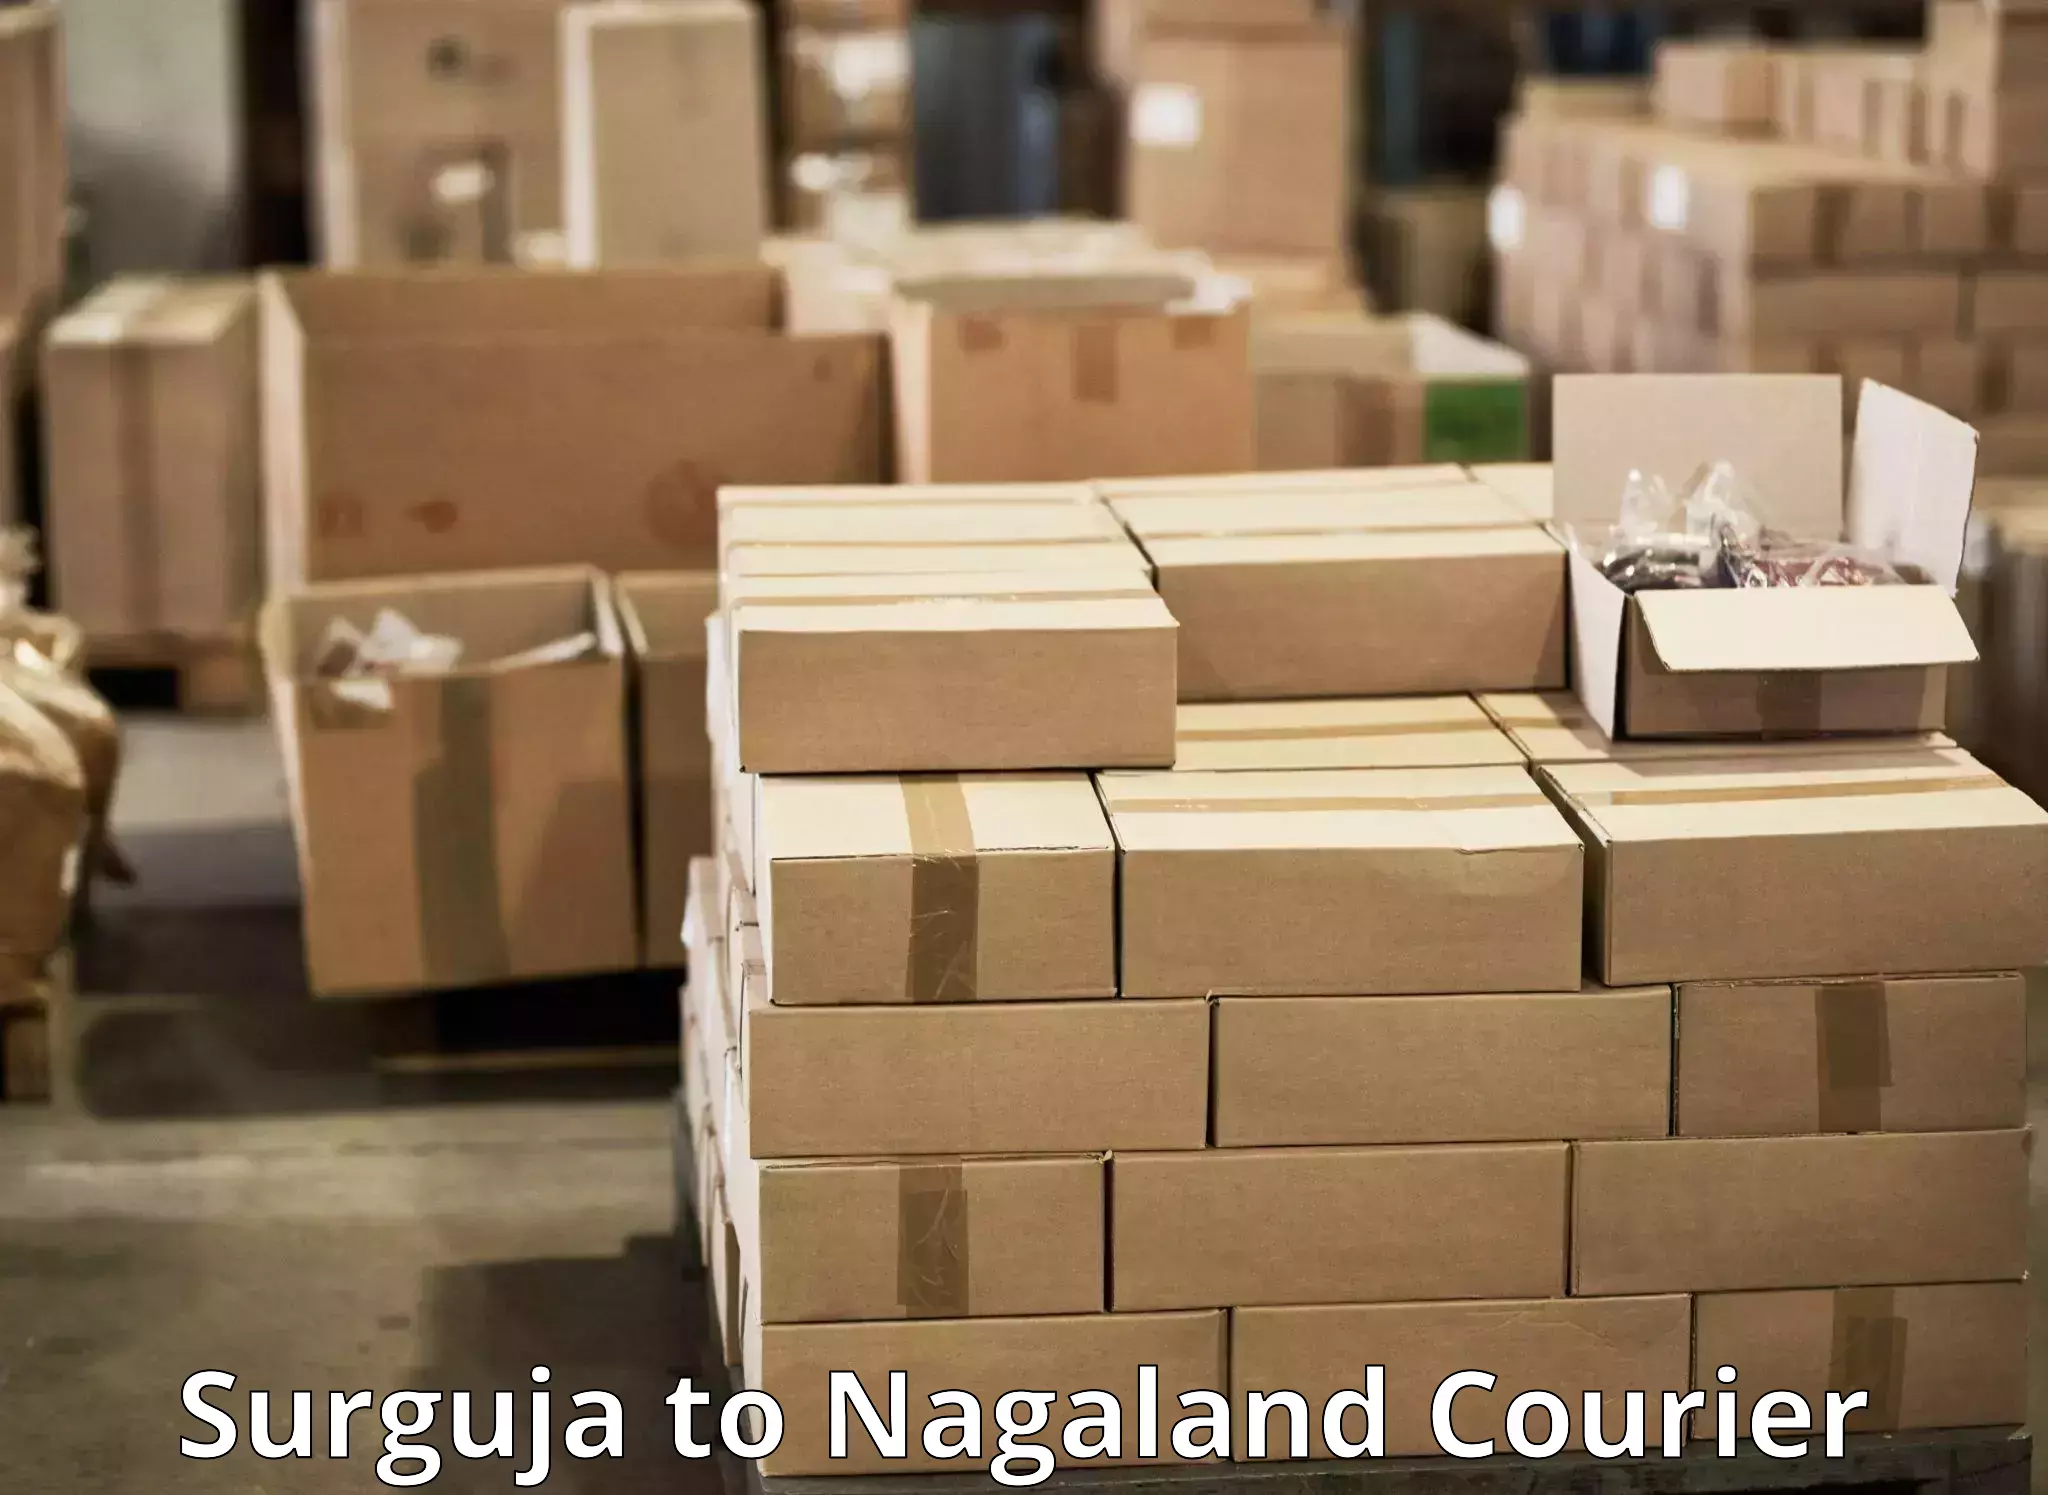 Fast delivery service Surguja to Nagaland